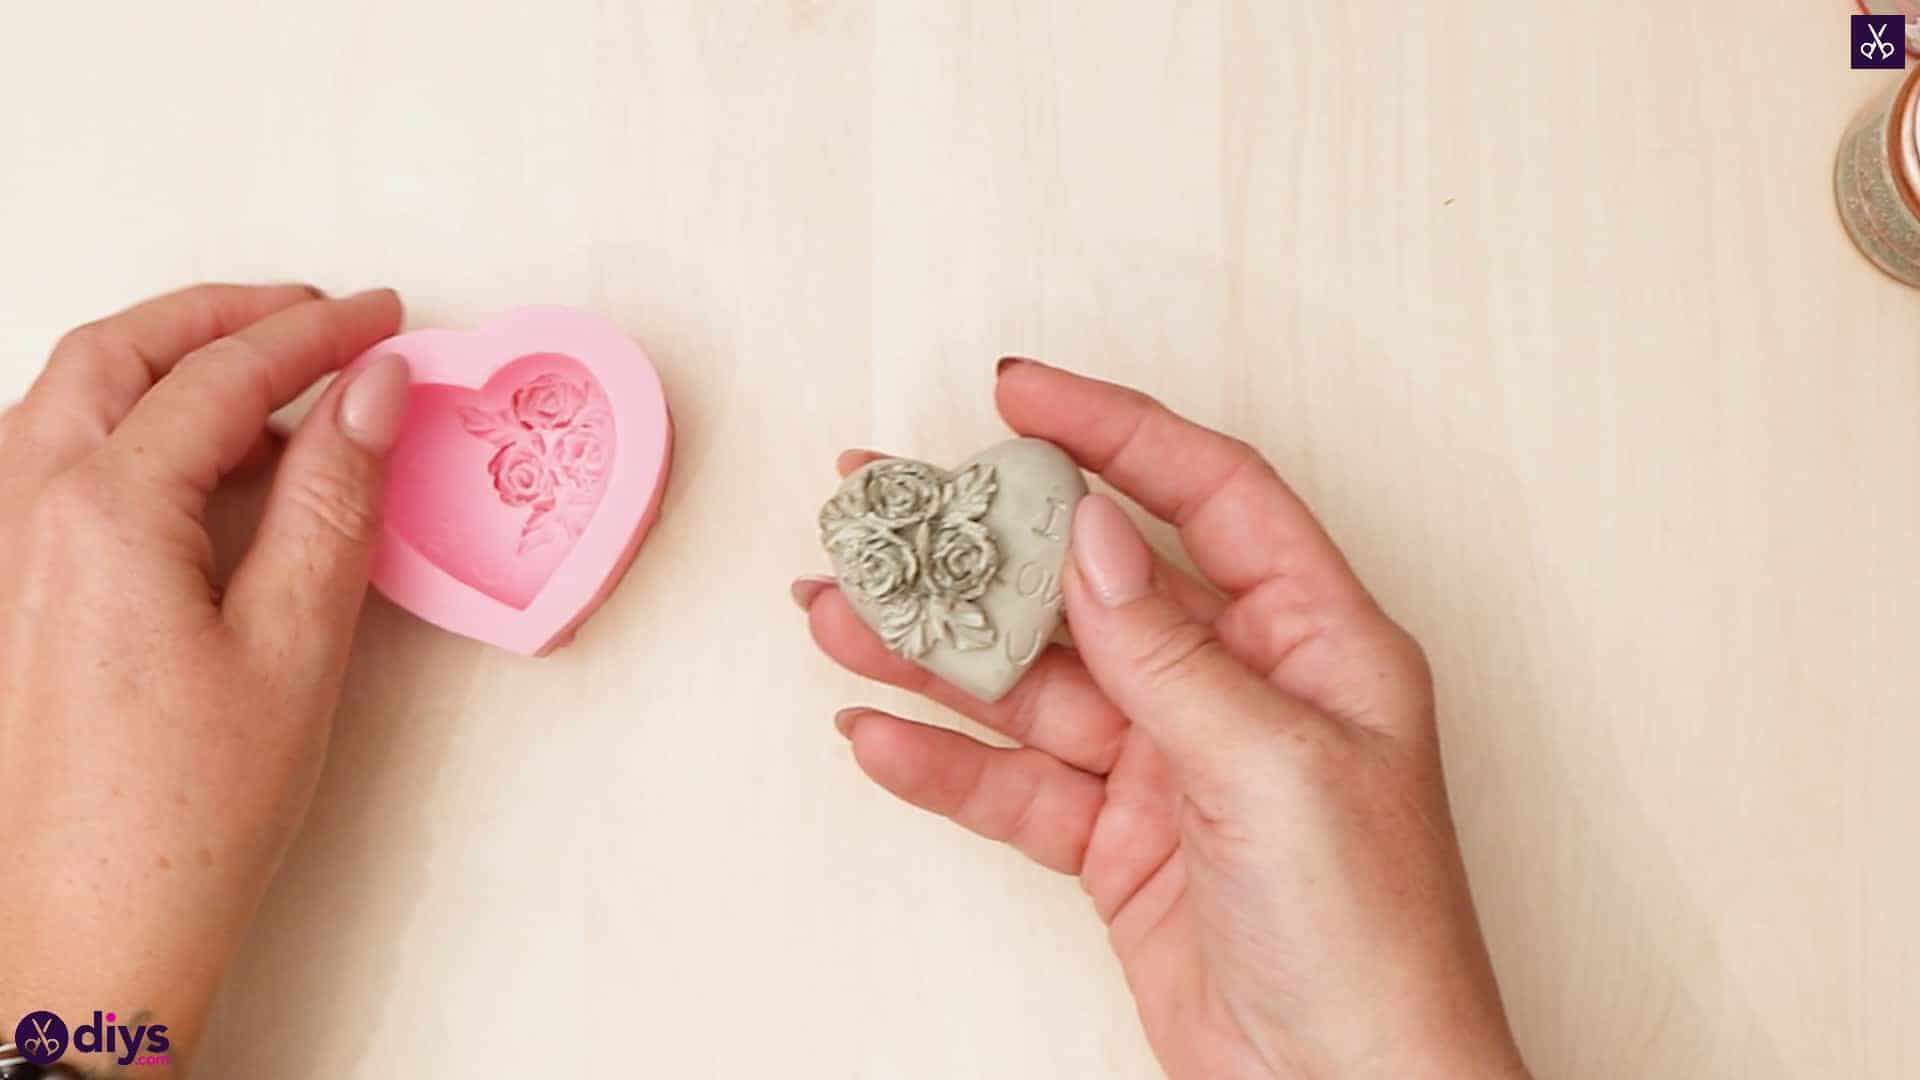 Diy concrete heart and roses mold